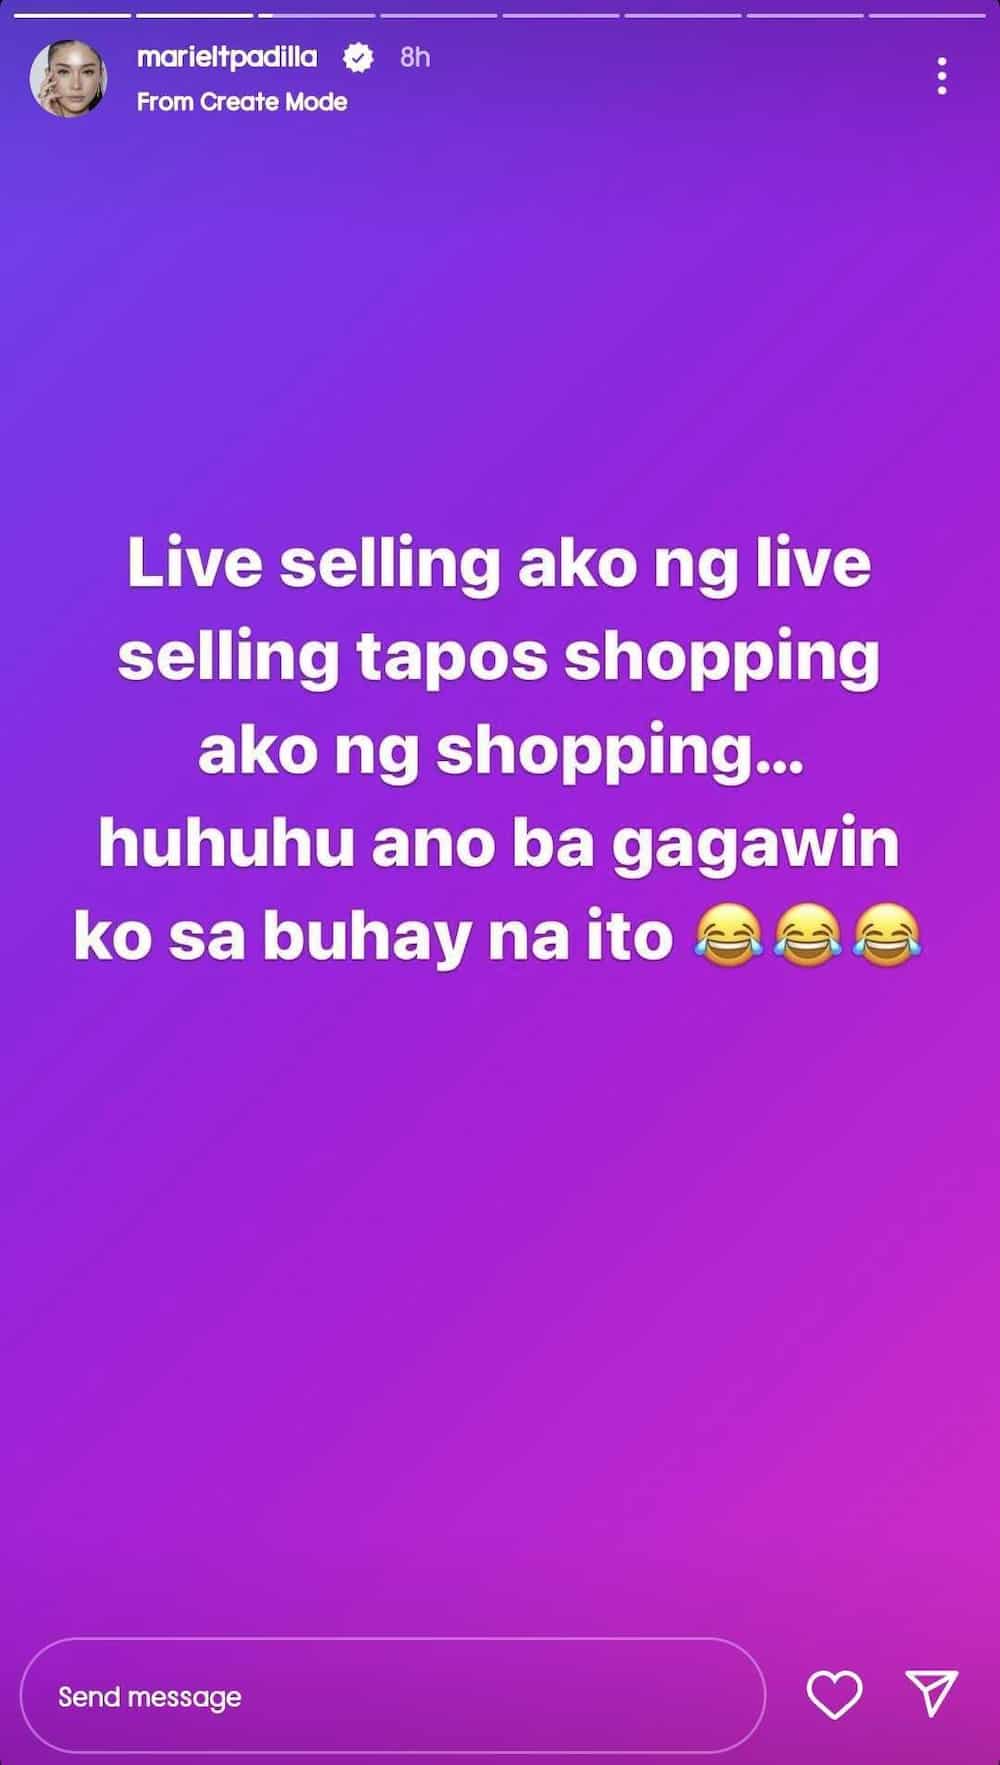 Mariel Padilla pens a funny and relatable post about shopping: "Tama na"